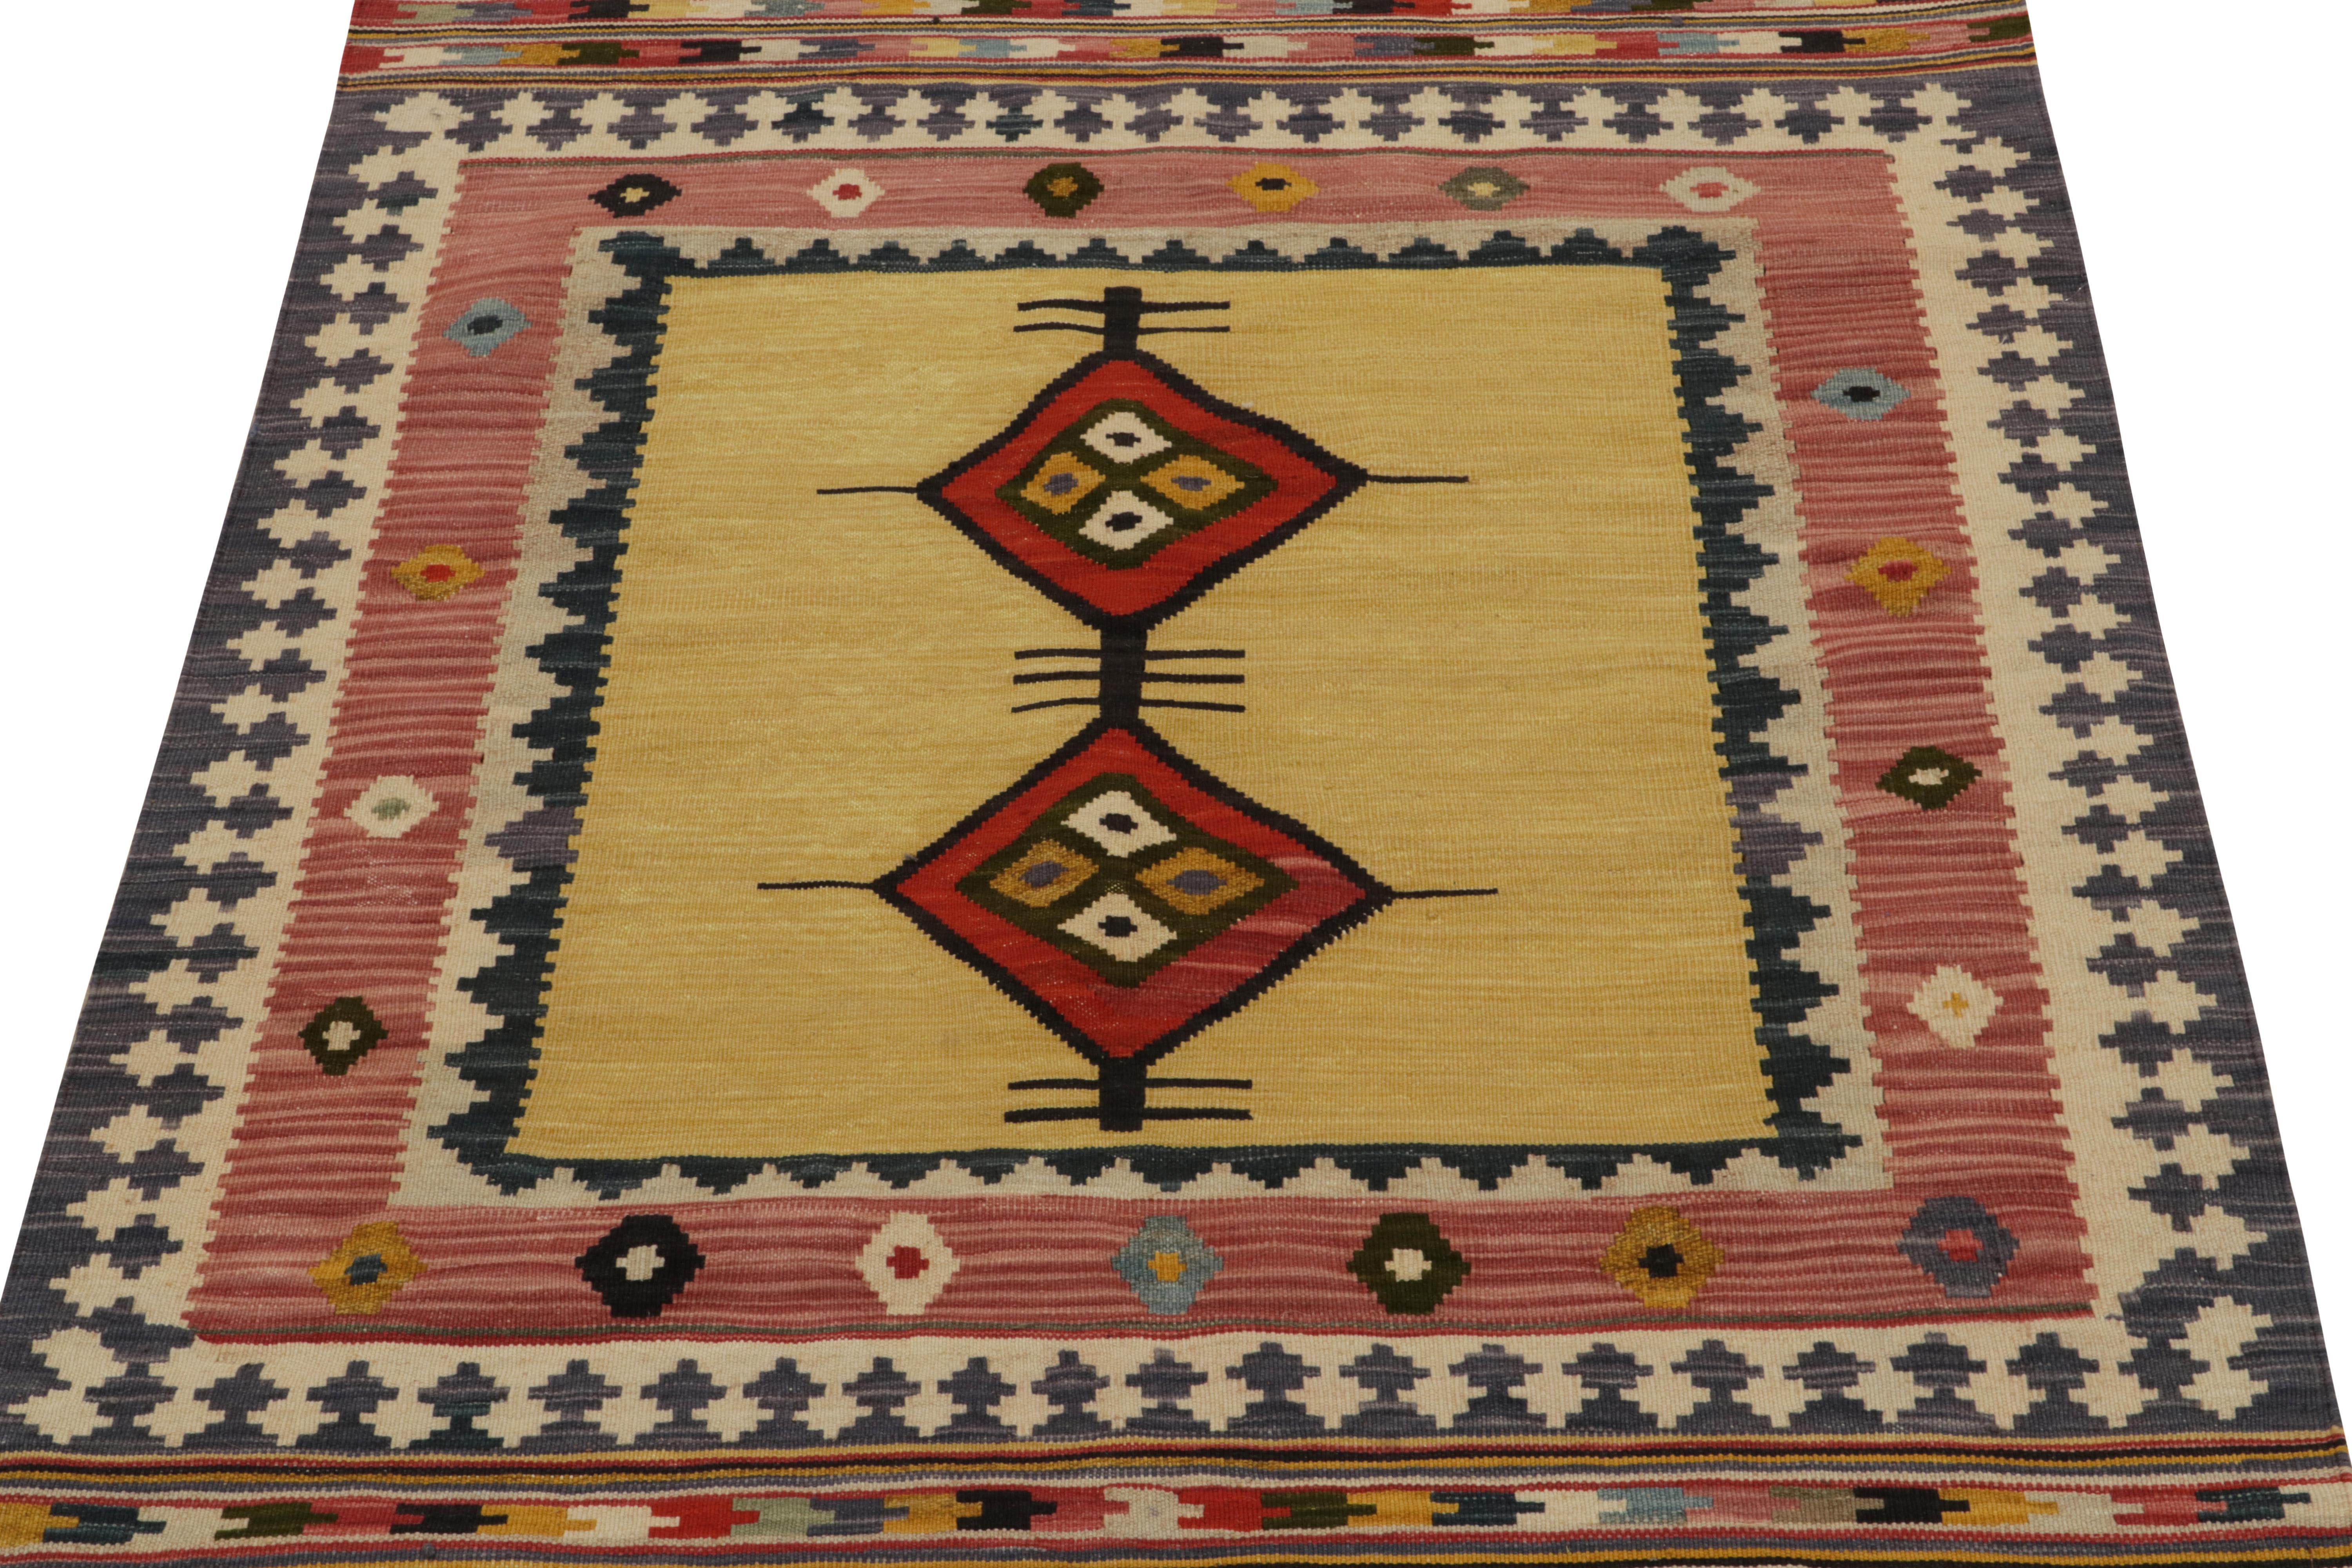 Originating circa 1980-1990, a rare vintage curation of small-sized Sofreh Kilim rugs our principal has newly unveiled. Distinguished for its 3x4 size, progressive colorways, and uncommon durability among flat weaves.

This particular rug carries